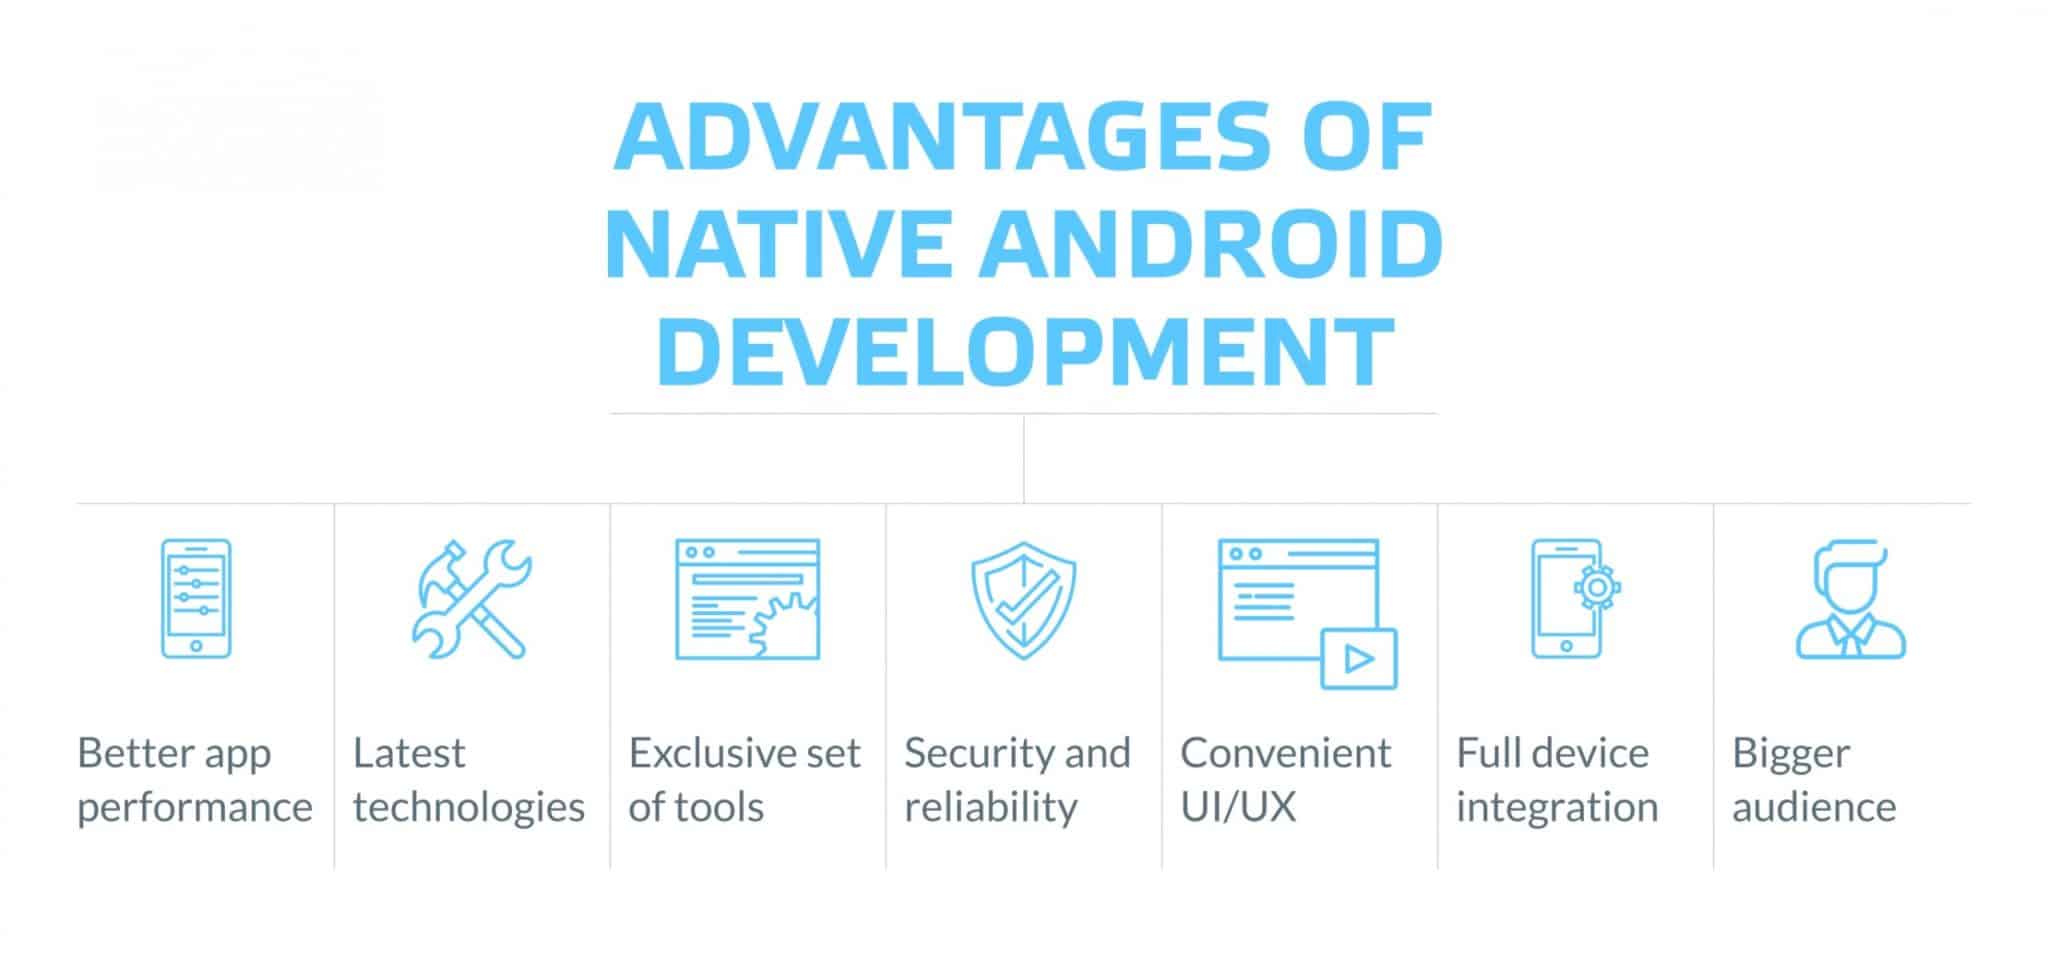 What is native android development?